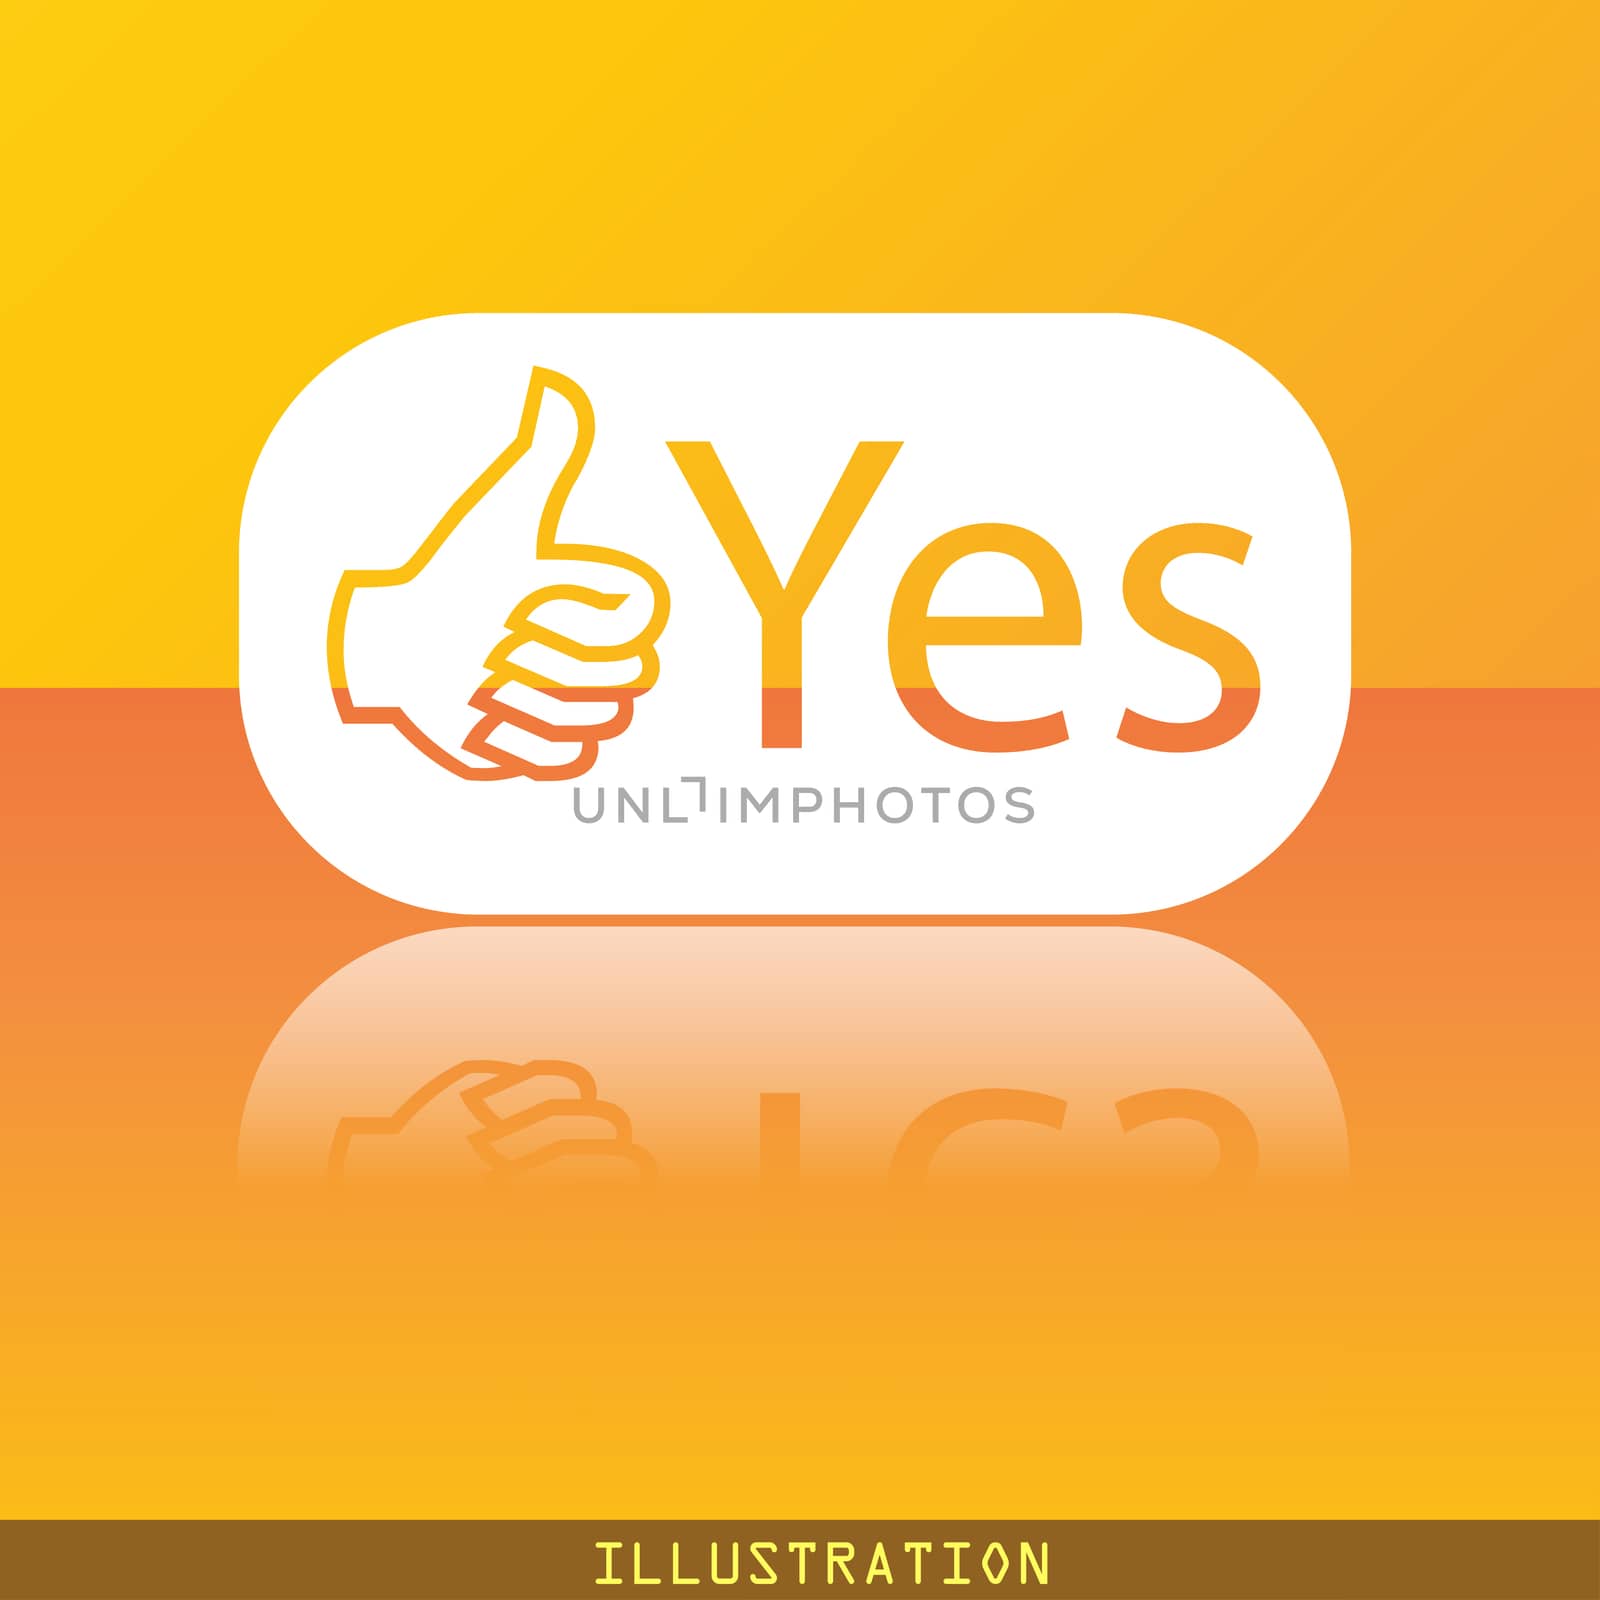 Yes icon symbol Flat modern web design with reflection and space for your text. illustration. Raster version